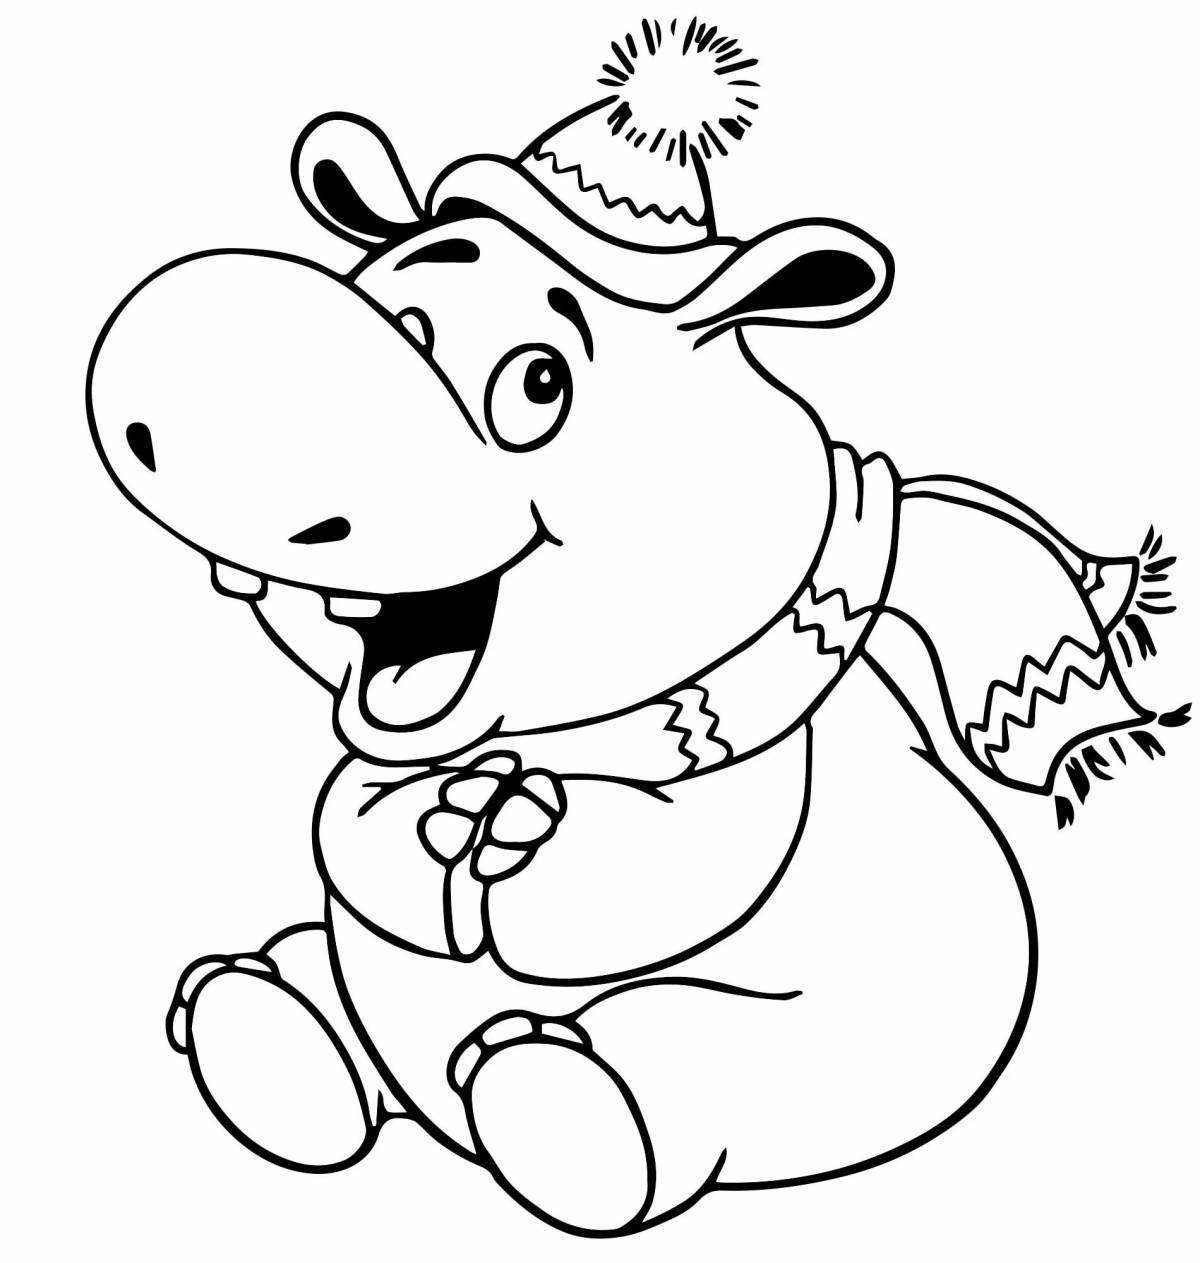 Living hippo coloring for kids